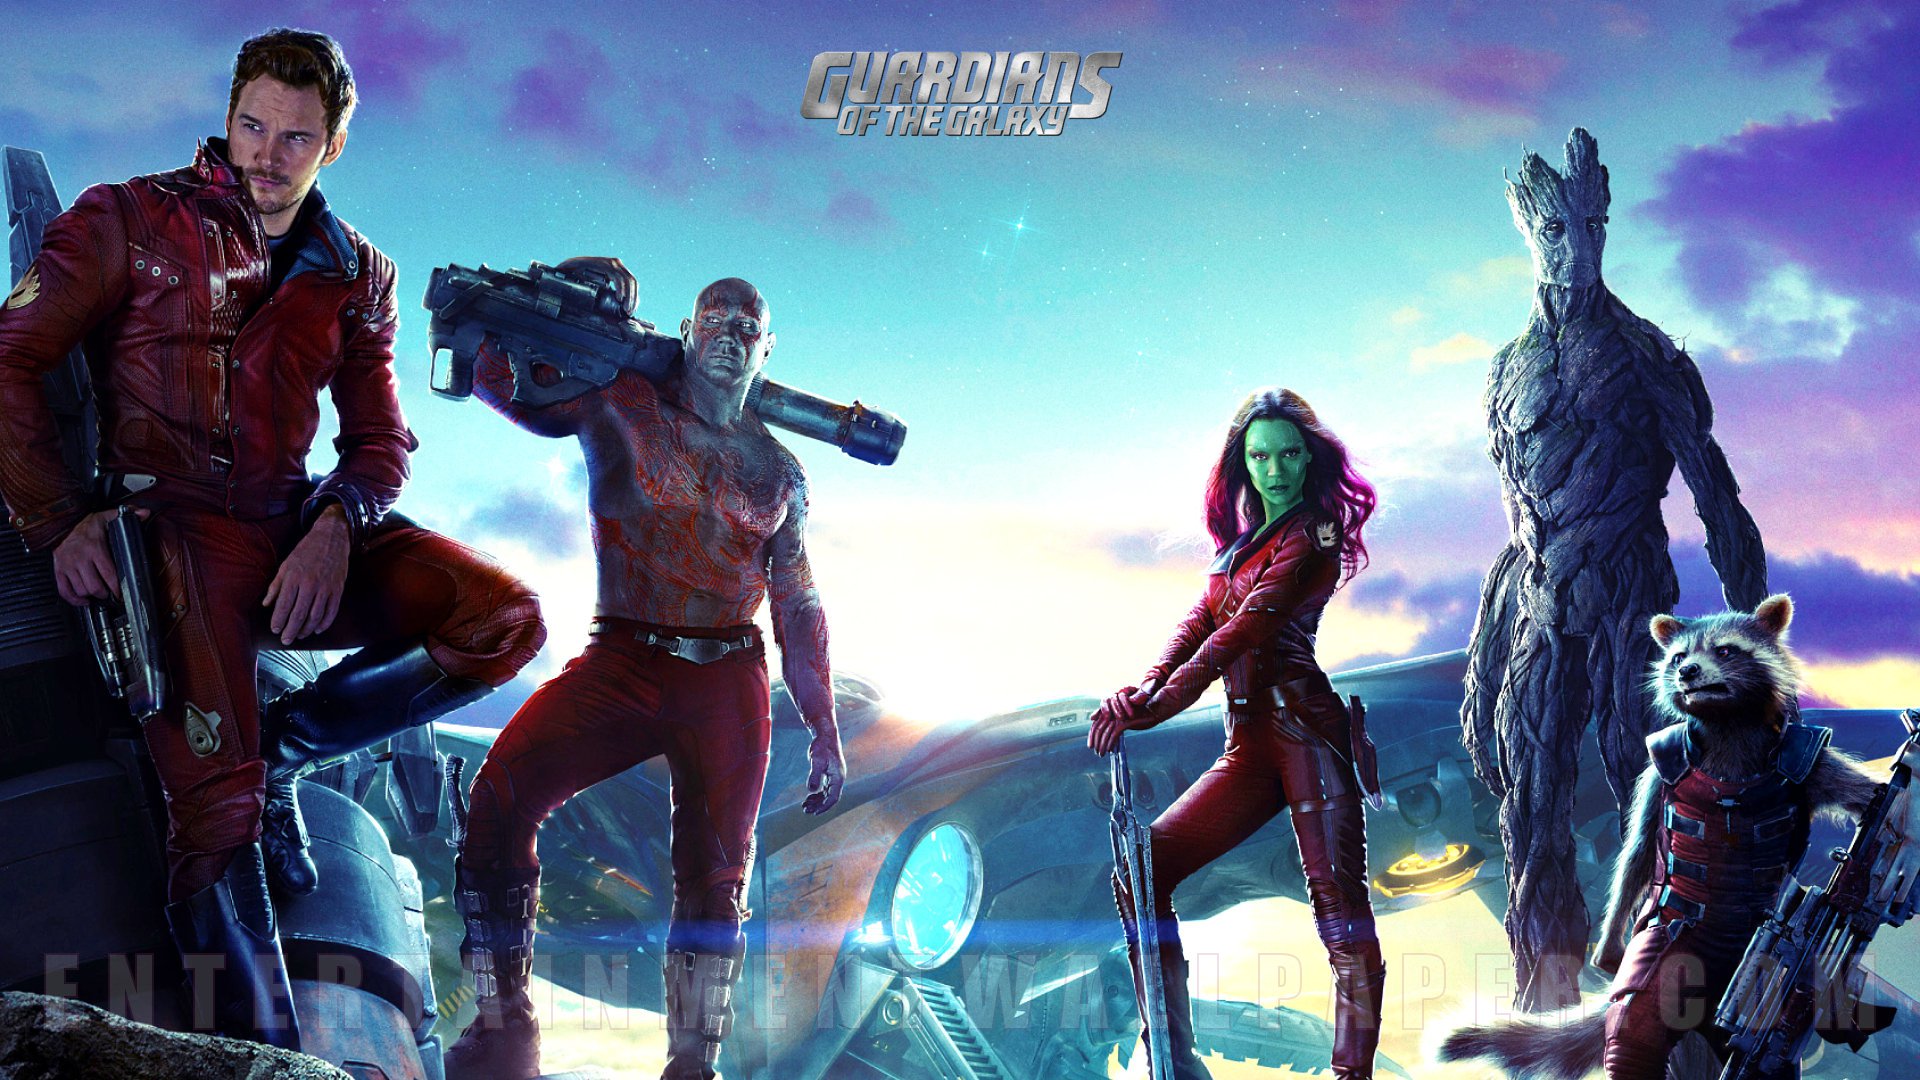 GUARDIANS OF THE GALAXY are Defenders of the Superhero Movie